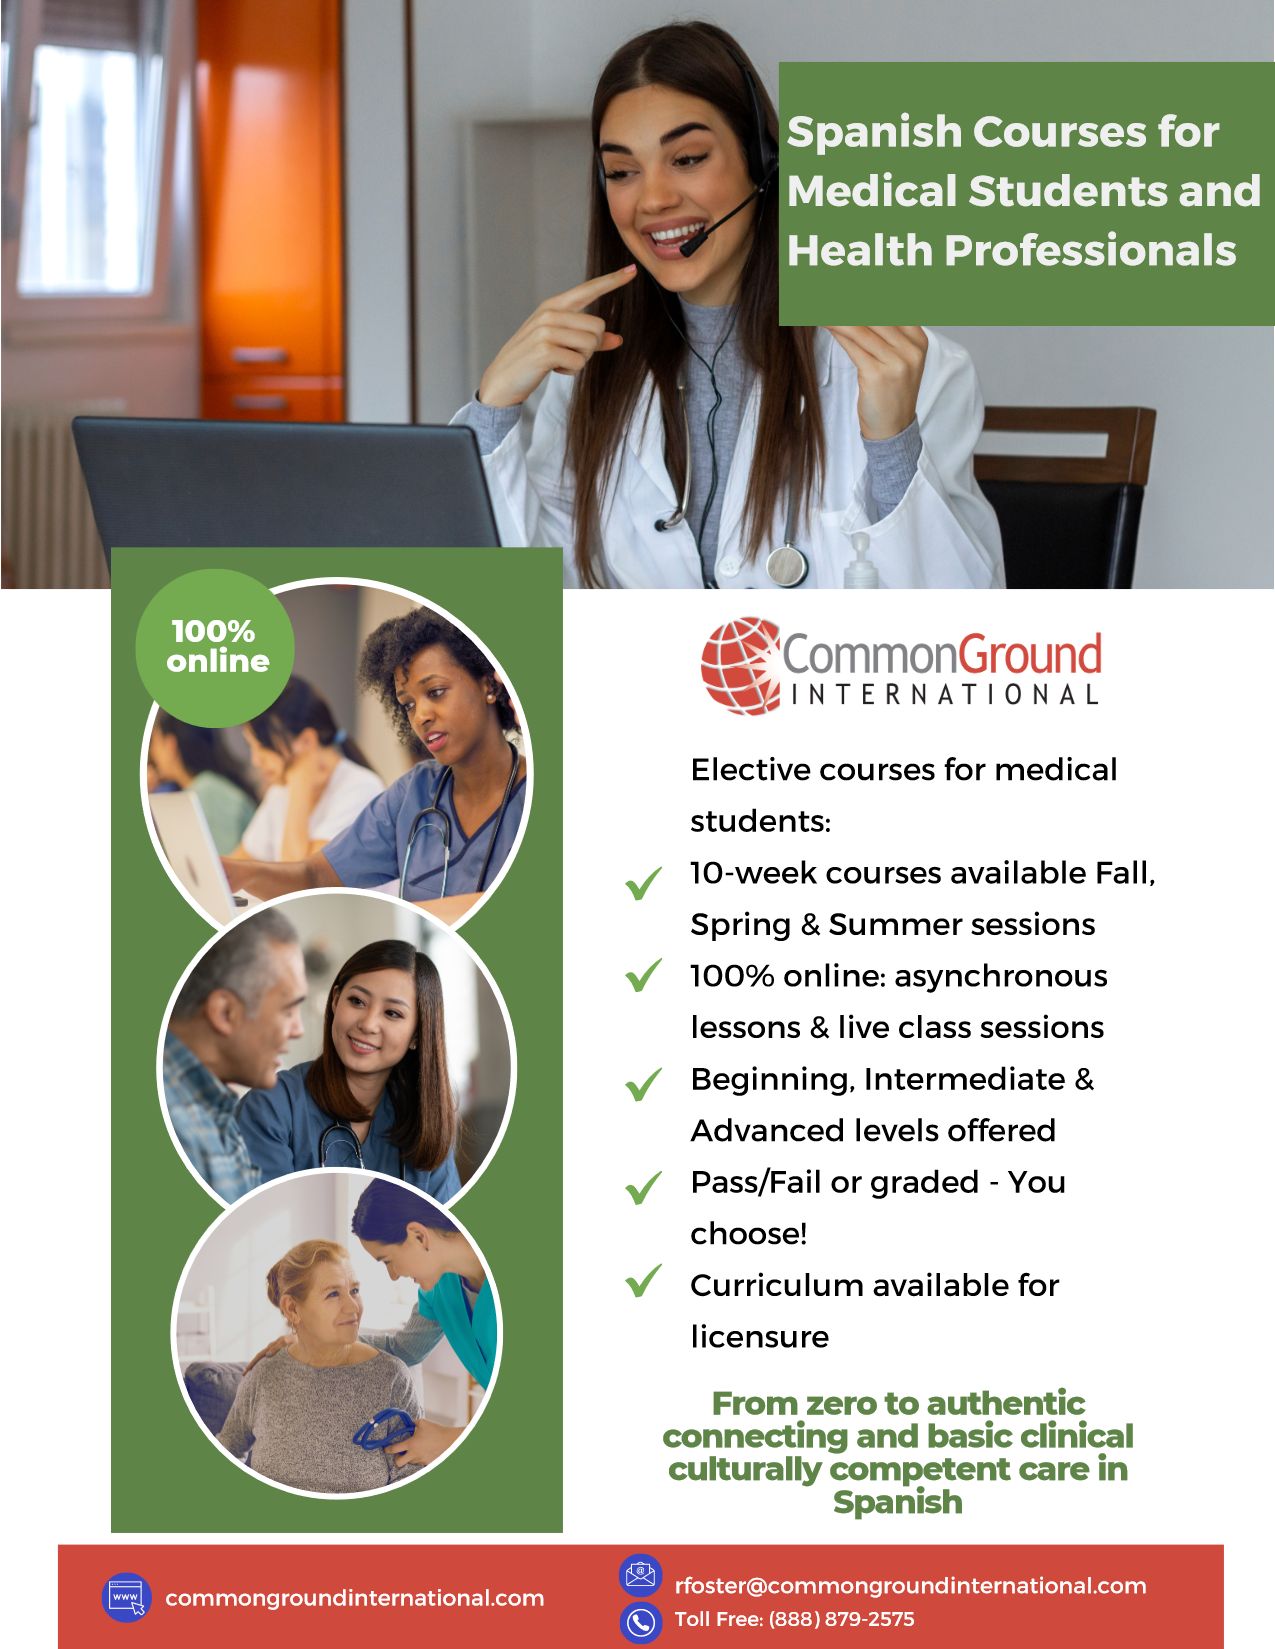 Spanish Courses for Medical Students and Health Professionals